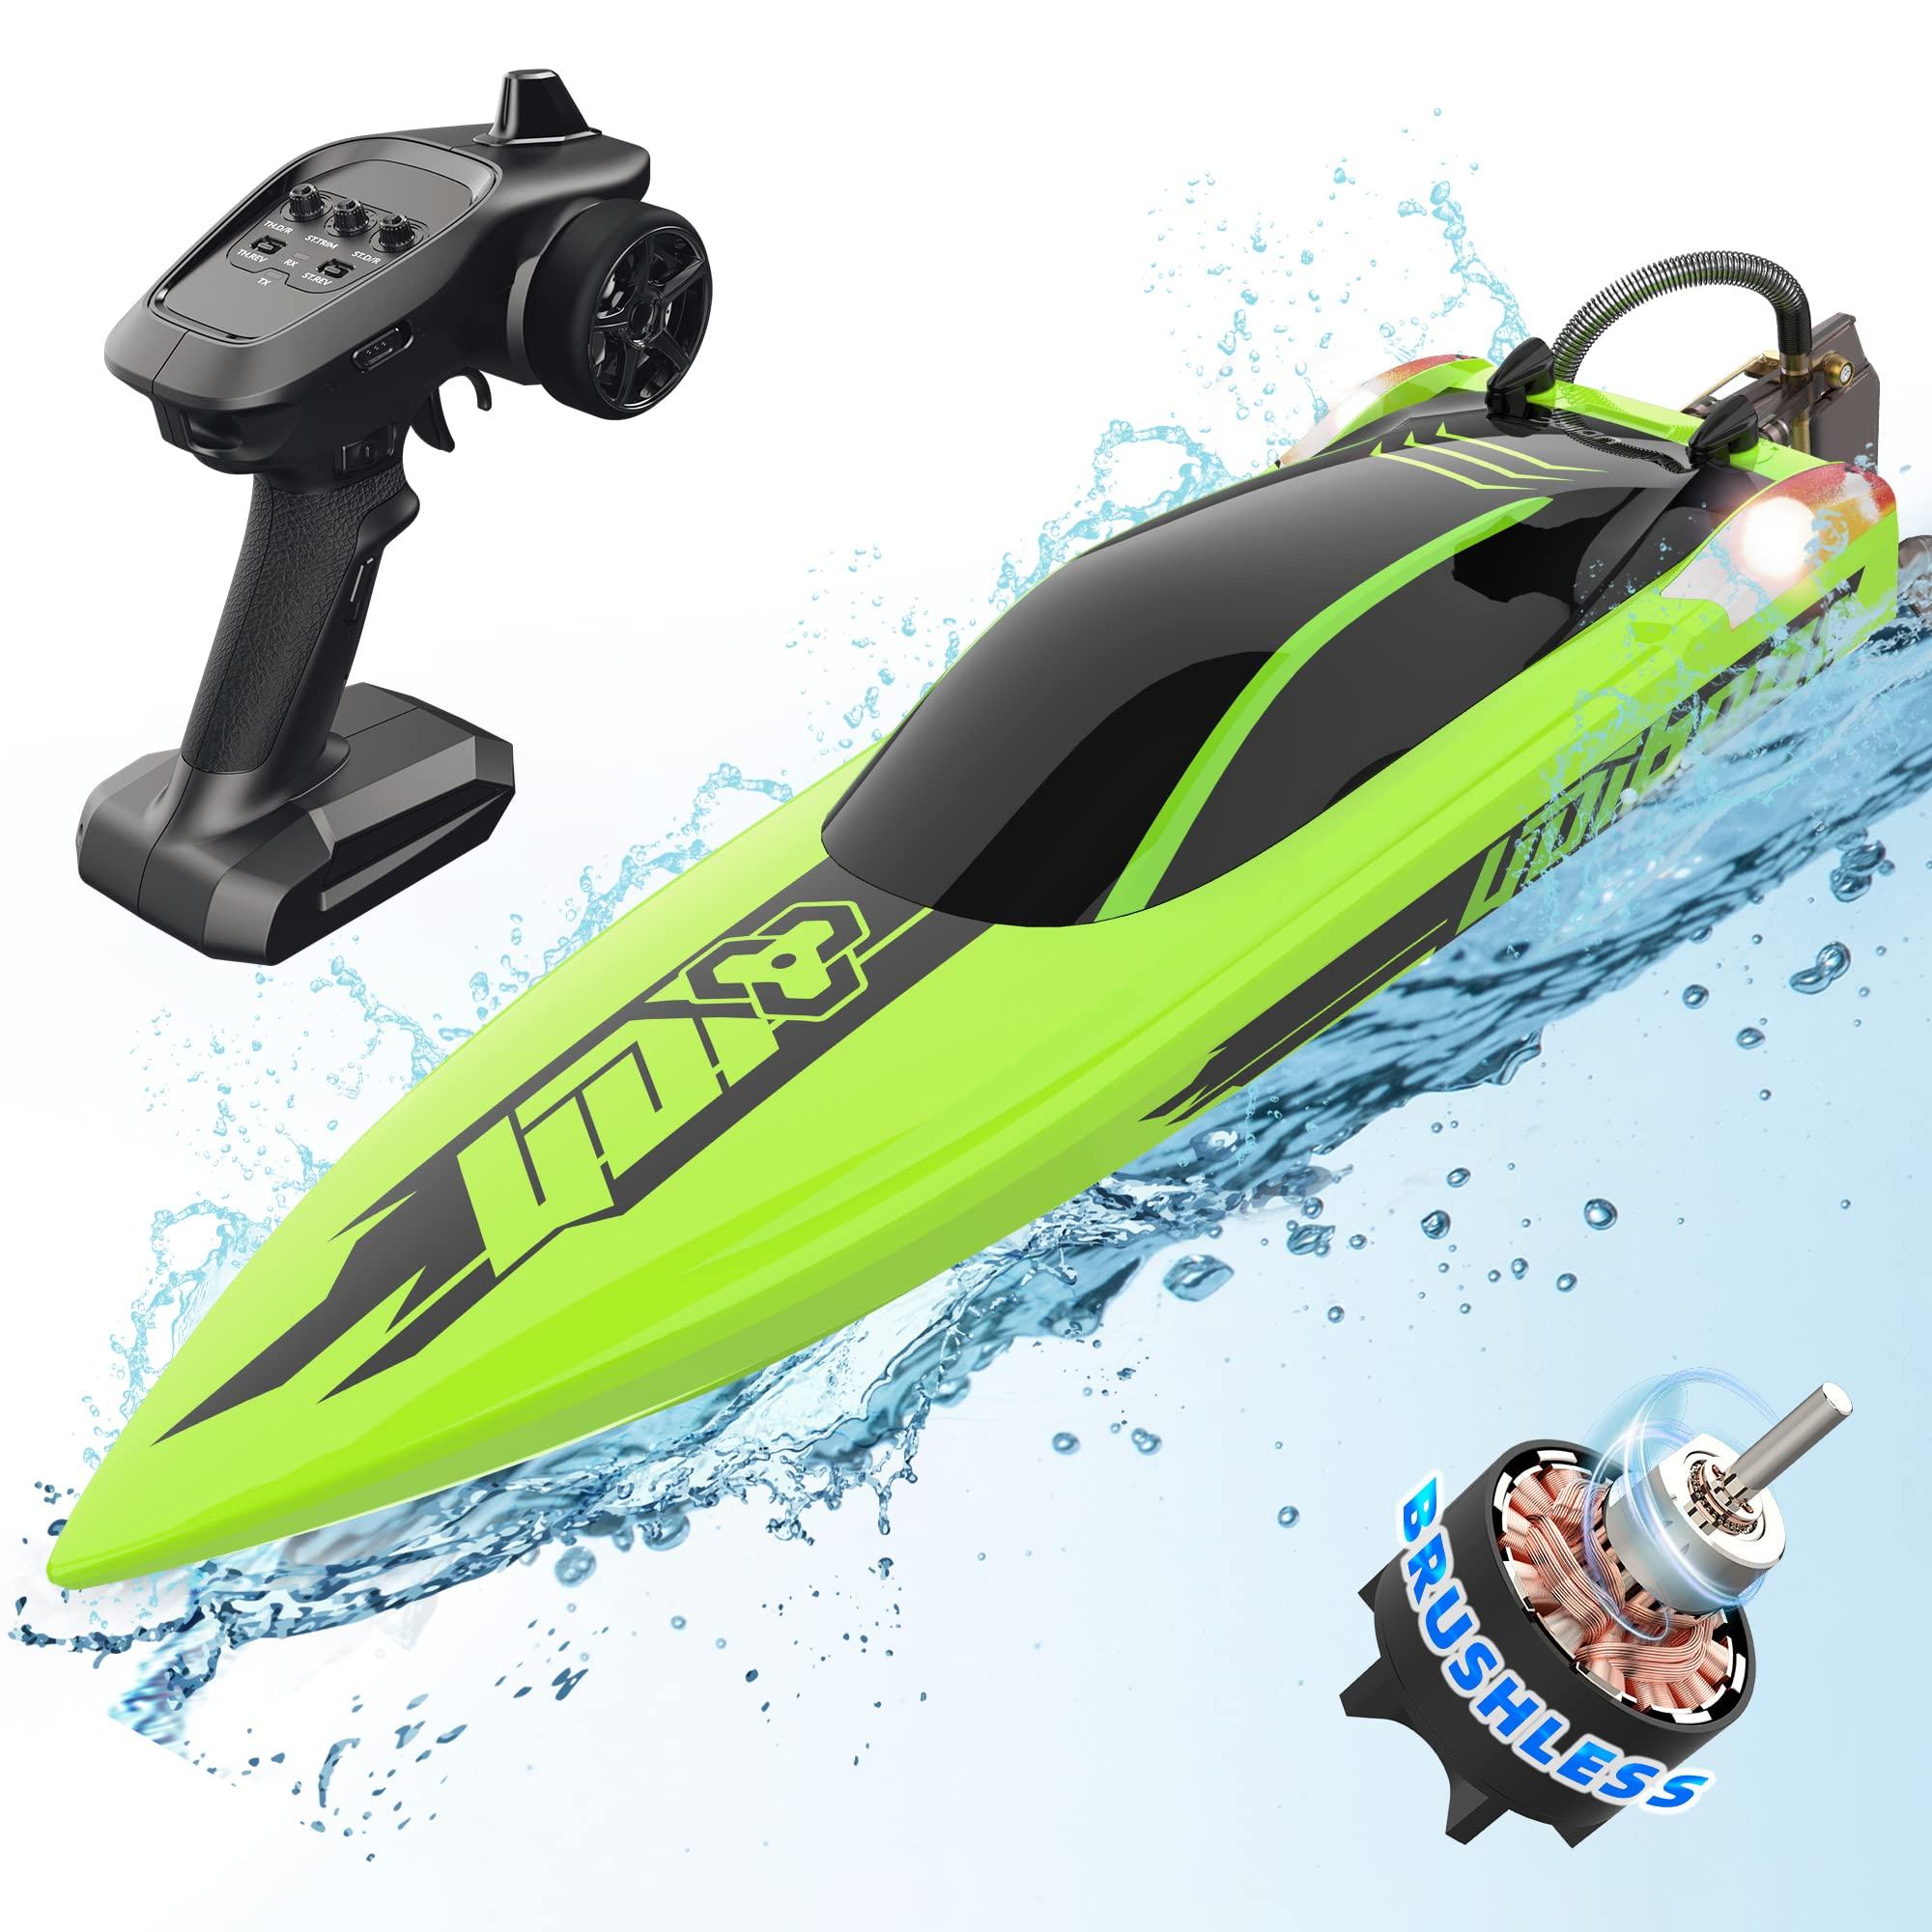 Rc Speed Boat Amazon: Factors to Consider When Choosing an RC Speed Boat on Amazon